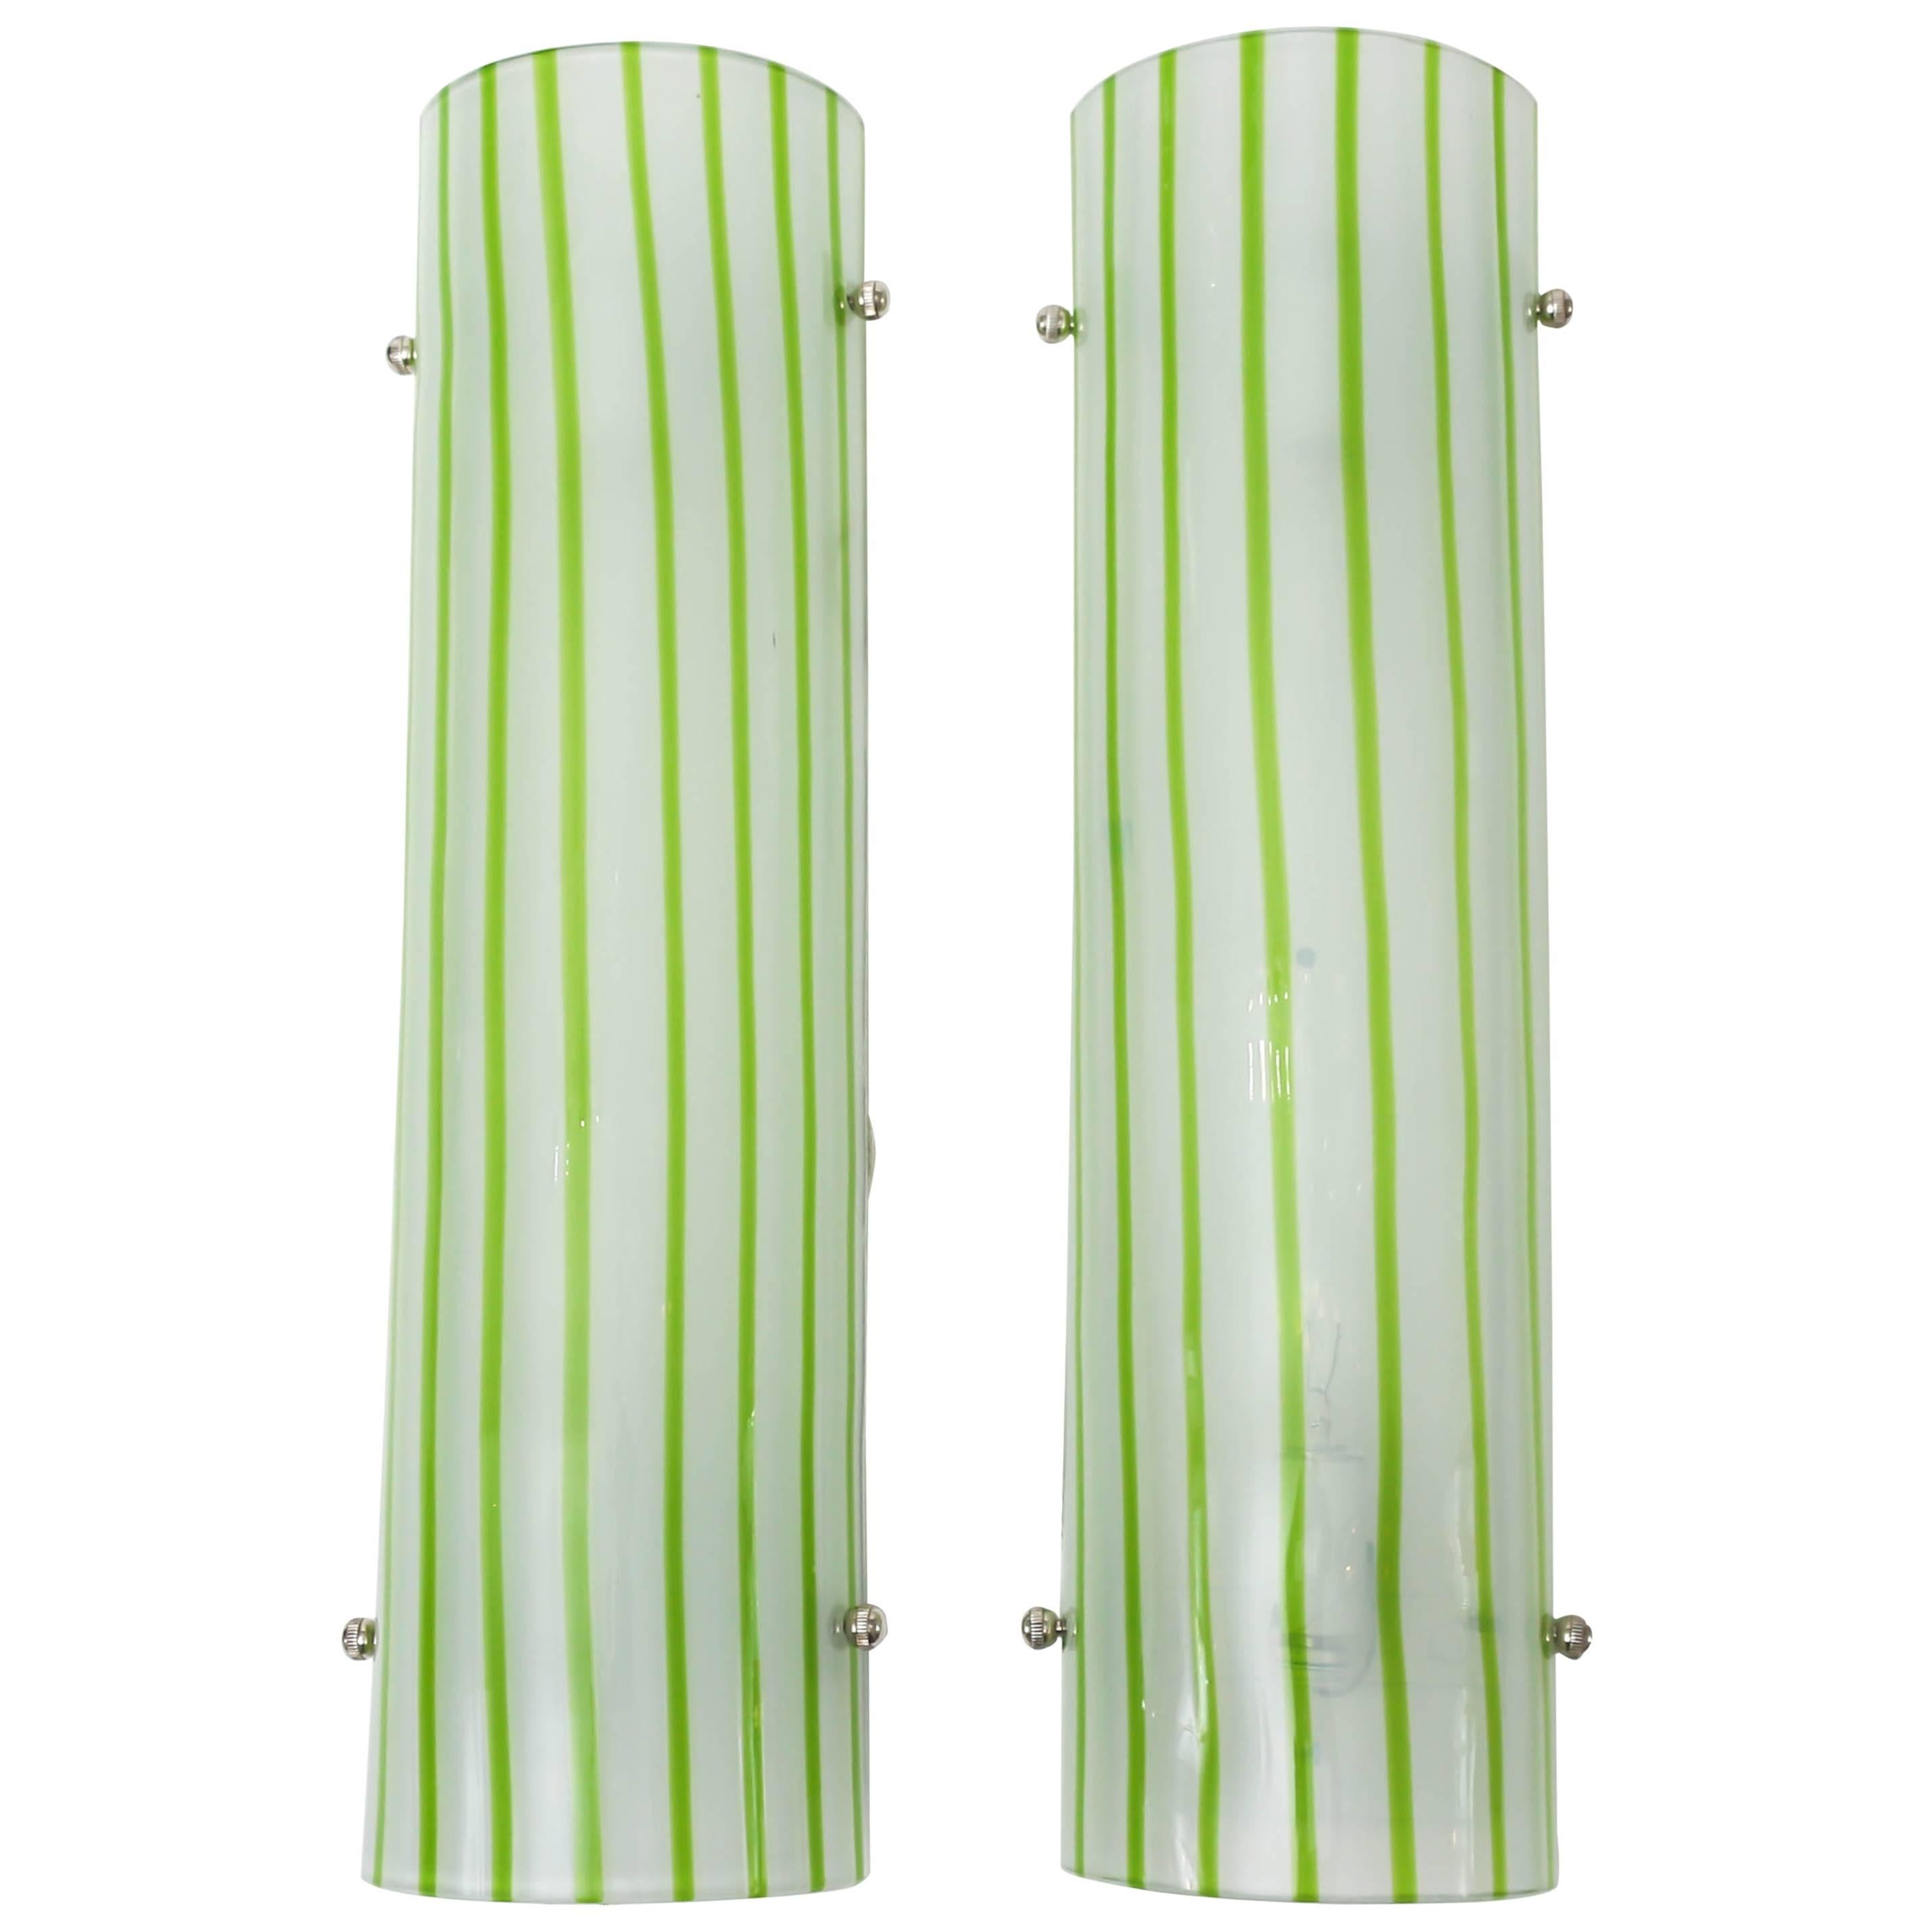 Pair of Green and White Striped Murano Glass Sconces by Salviati